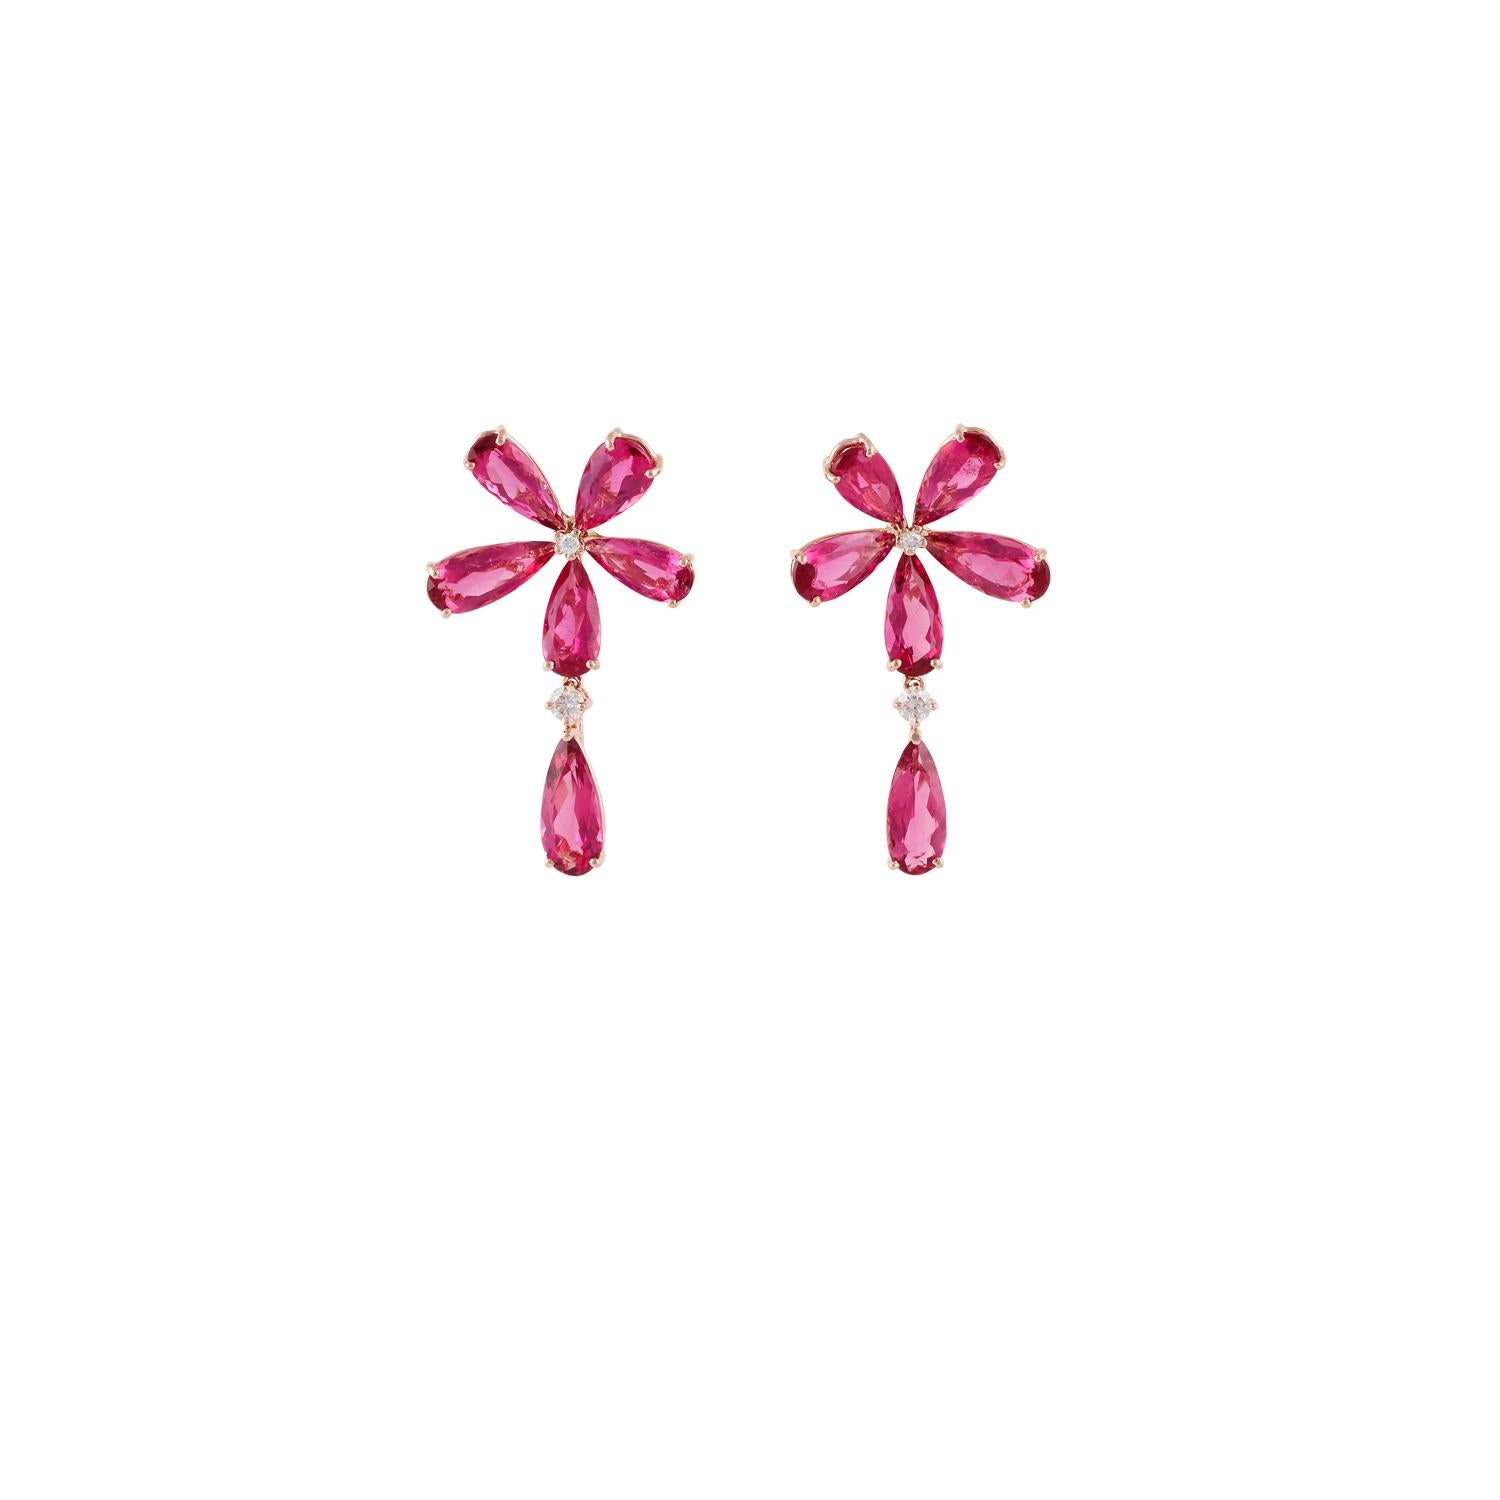 An exclusive earring with pear-shaped rubellite & round-shaped brilliant-cut diamonds studded in 18K rose gold, earrings have 12 pieces of fine quality rubellites weight 12.53 carats & 4 pieces of diamonds weight 0.27 carat the total gold weight is